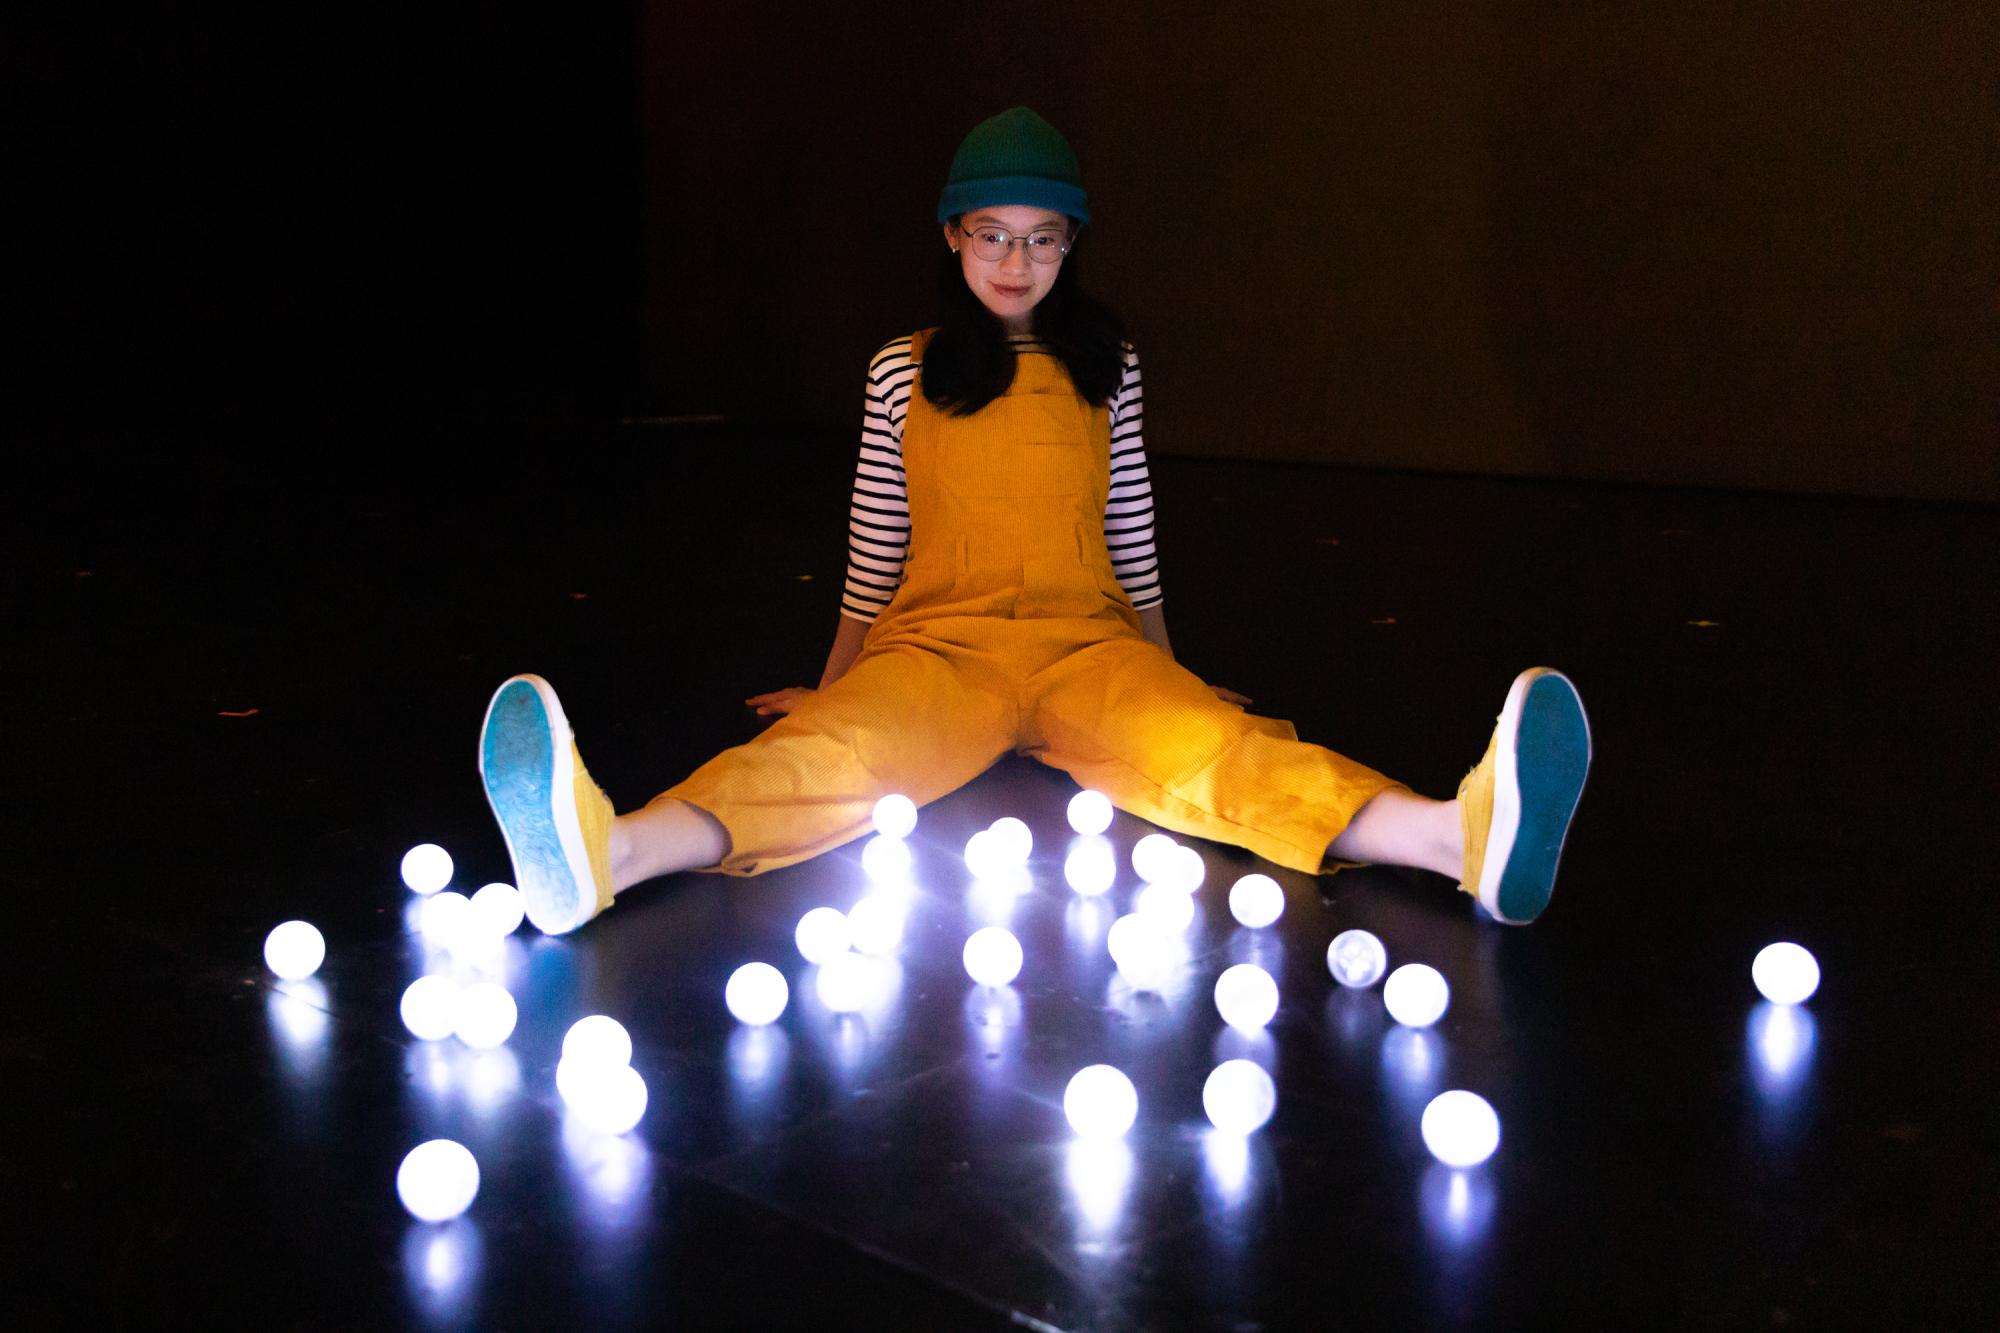 An actor in yellow overalls sits in front of glowing white spheres